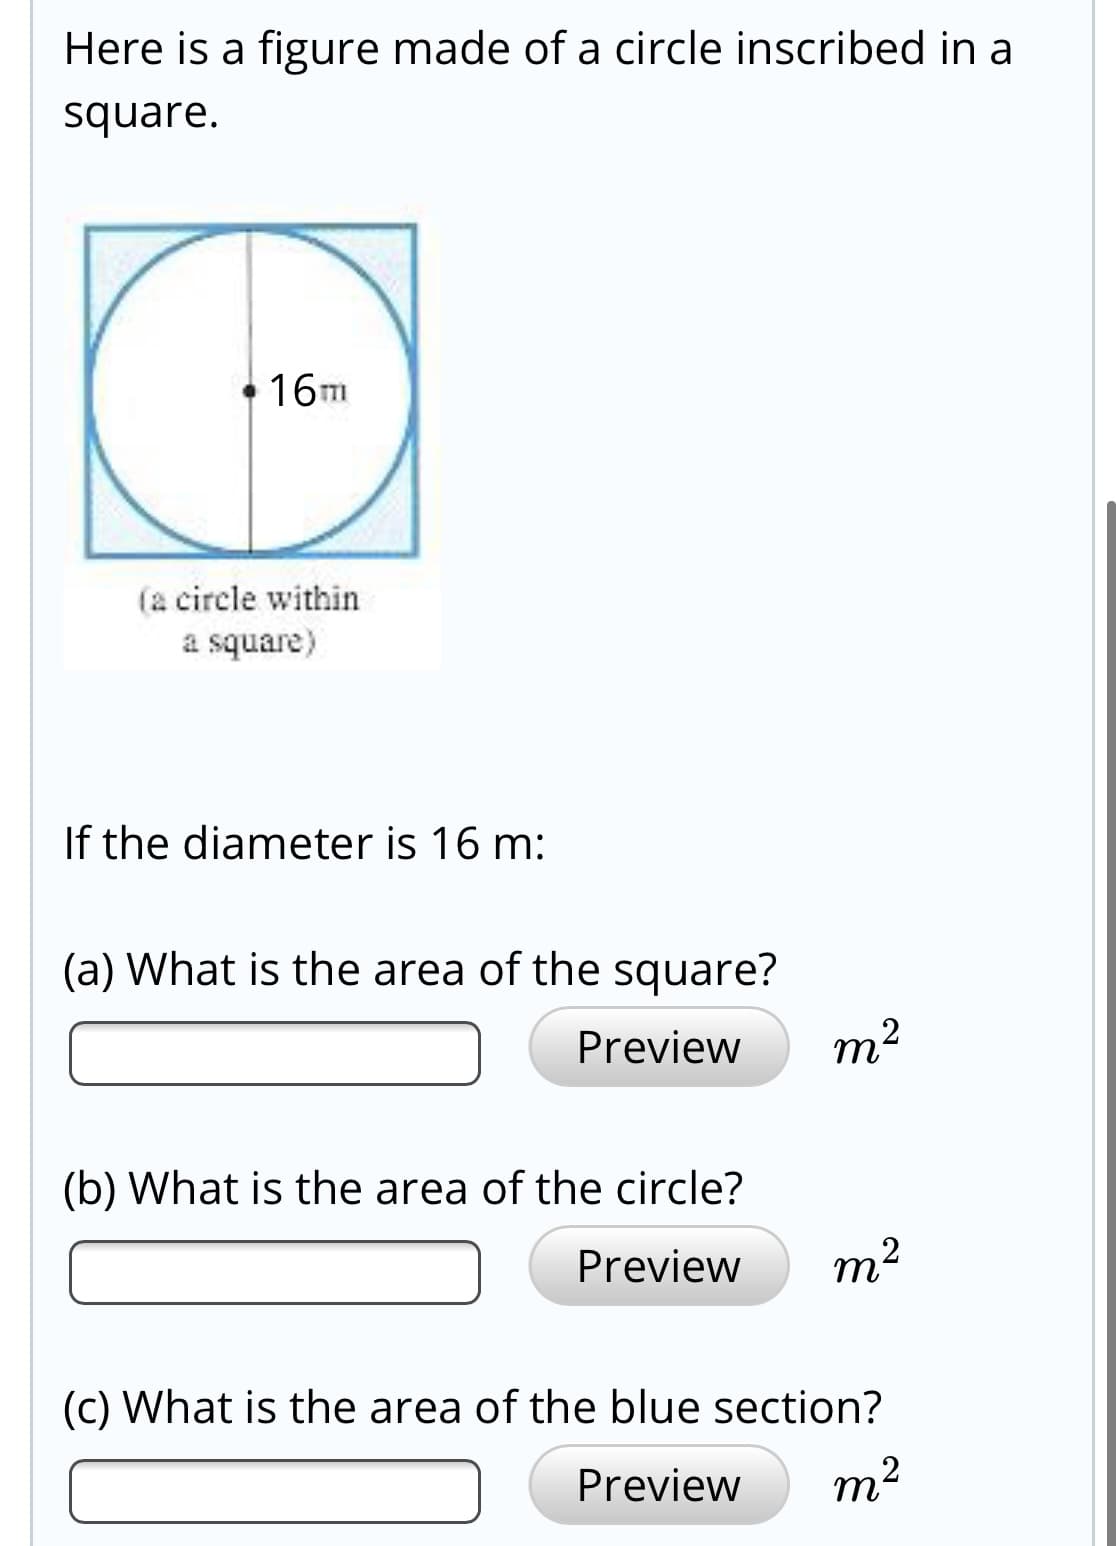 Here is a figure made of a circle inscribed in a
square.
16m
(a circle within
a square)
If the diameter is 16 m:
(a) What is the area of the square?
Preview
m2
(b) What is the area of the circle?
Preview
m2
(c) What is the area of the blue section?
Preview
m2
